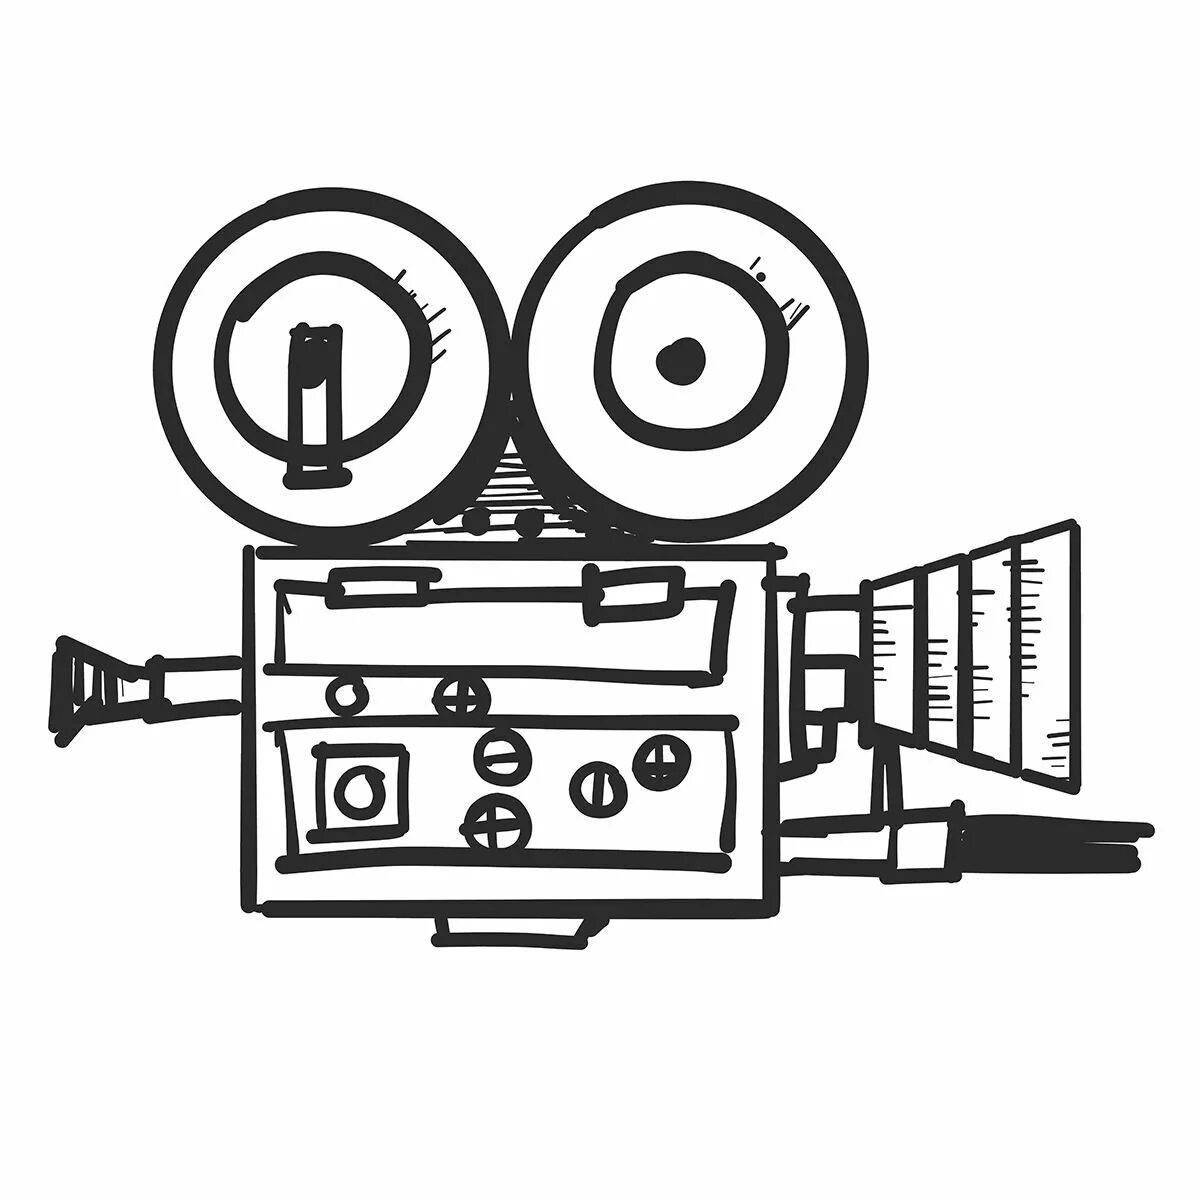 Great camcorder coloring page